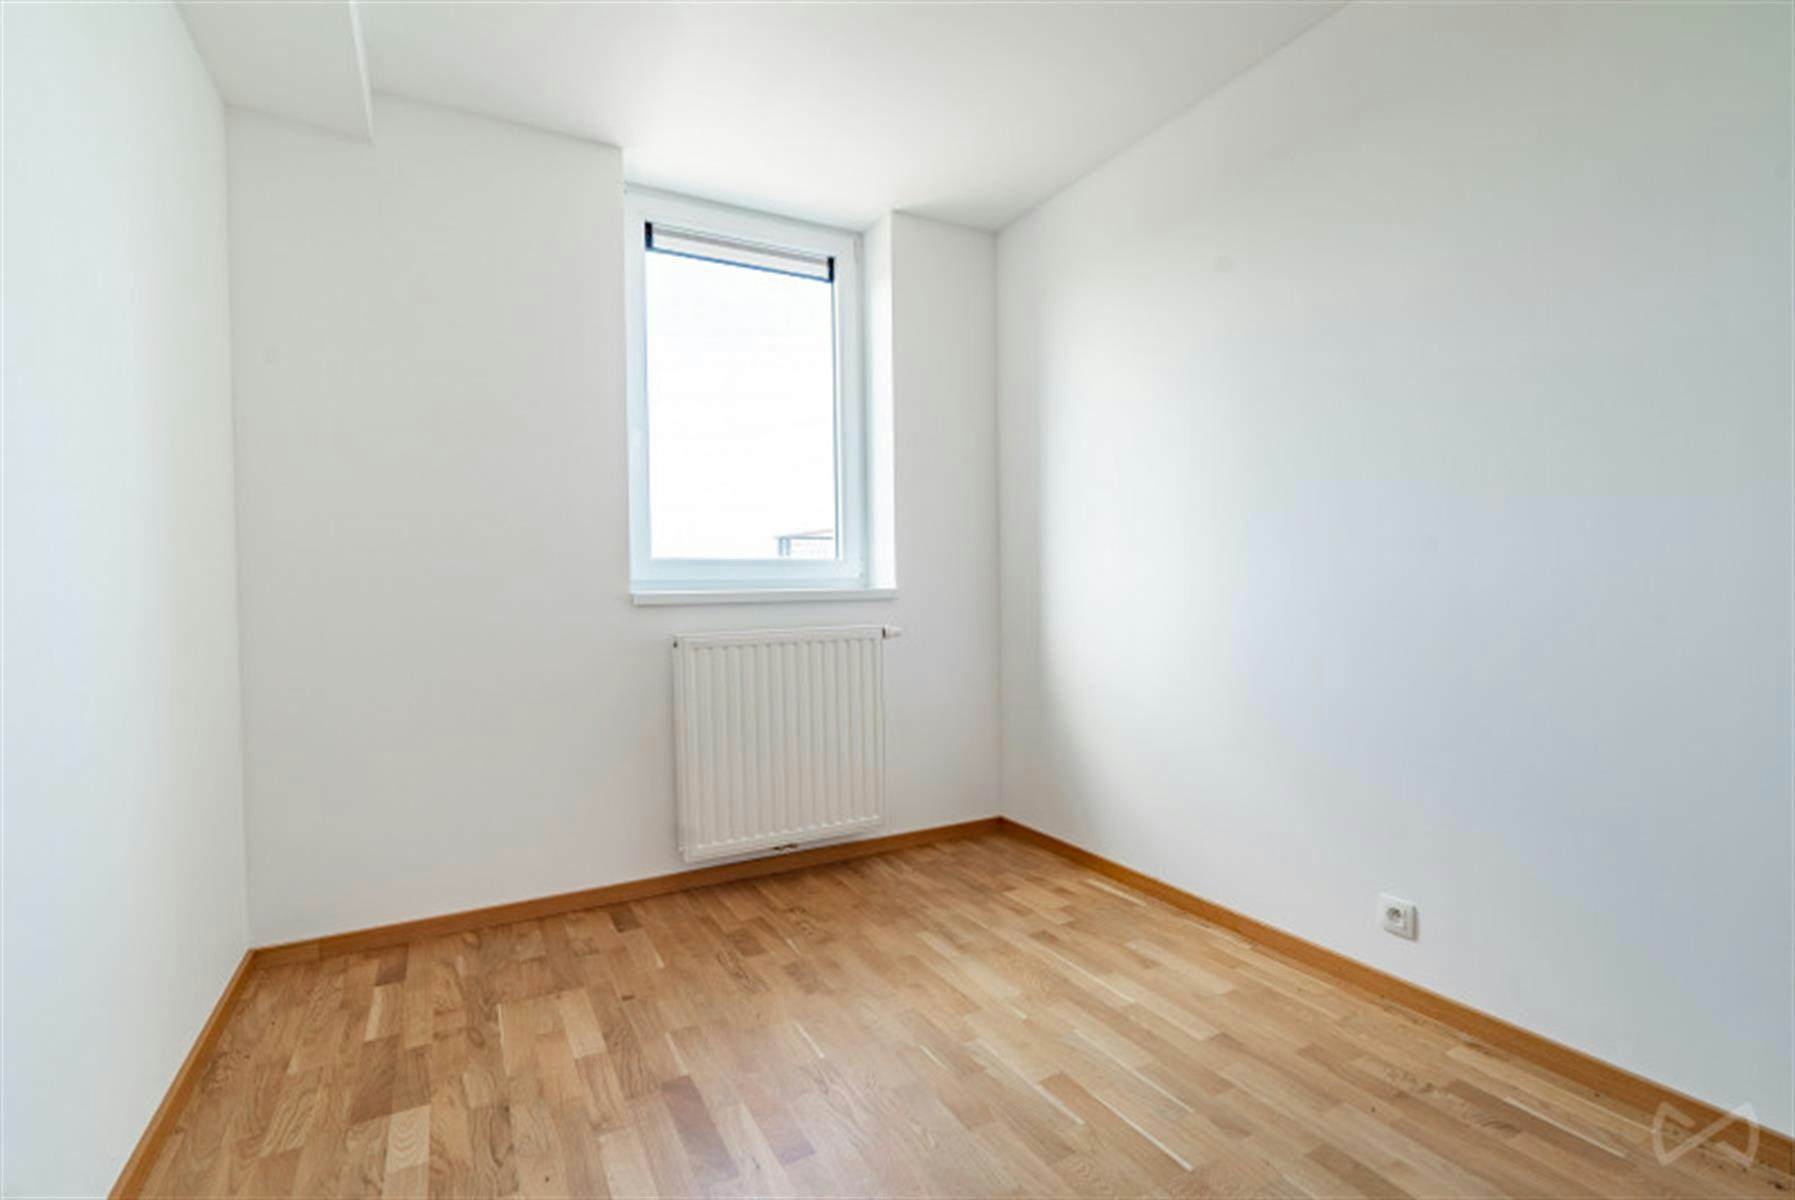 Picture 2 of 4 for Flat with two bedrooms in Mons